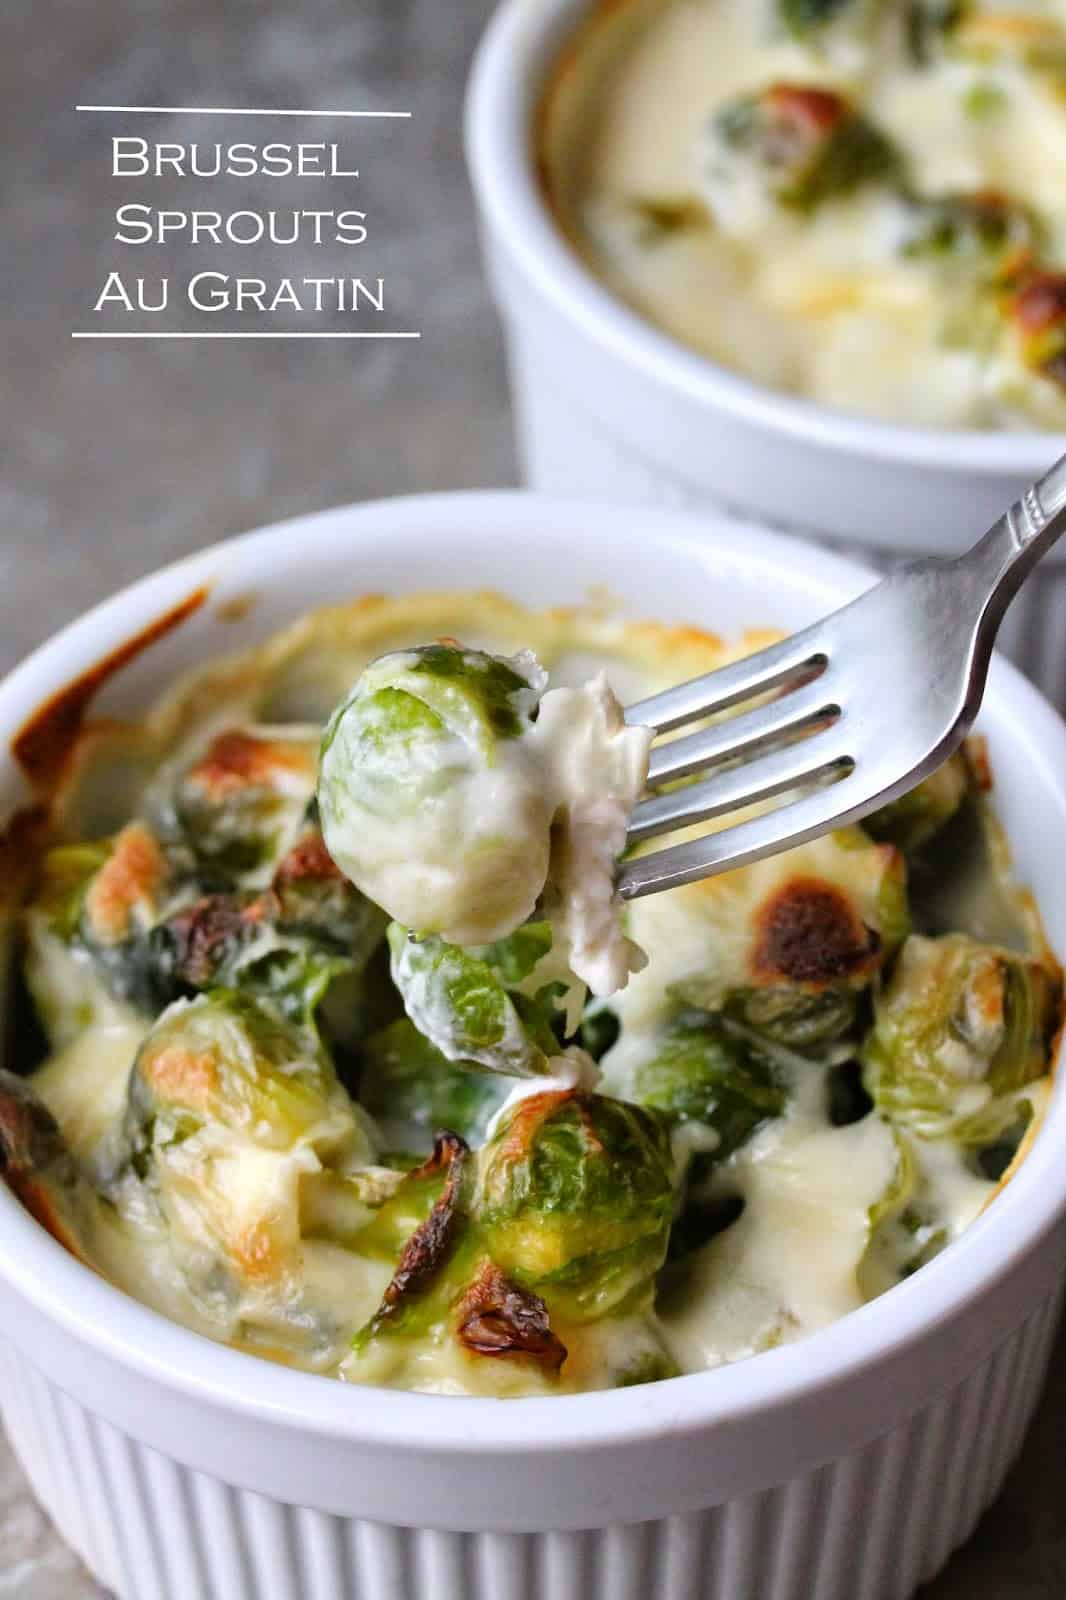 A fork lifts a bite of Brussel Sprouts Au Gratin from a bowl